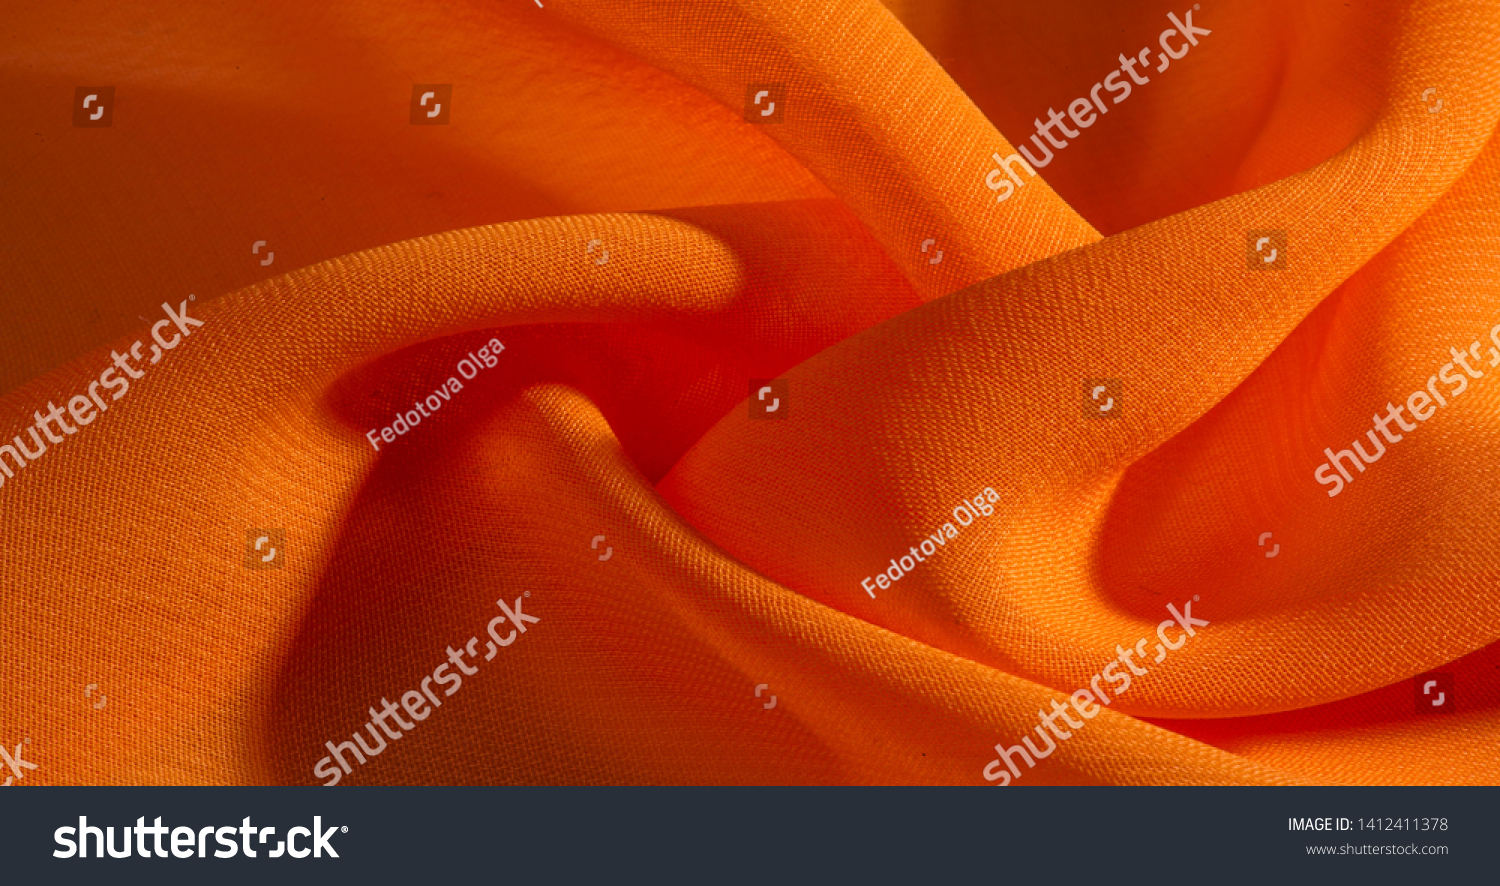 background, pattern, texture, Orange silk fabric has a brilliant luster. It folds into soft folds when draping and is the most versatile fabric. Be creative with beautiful accents of your design. #1412411378